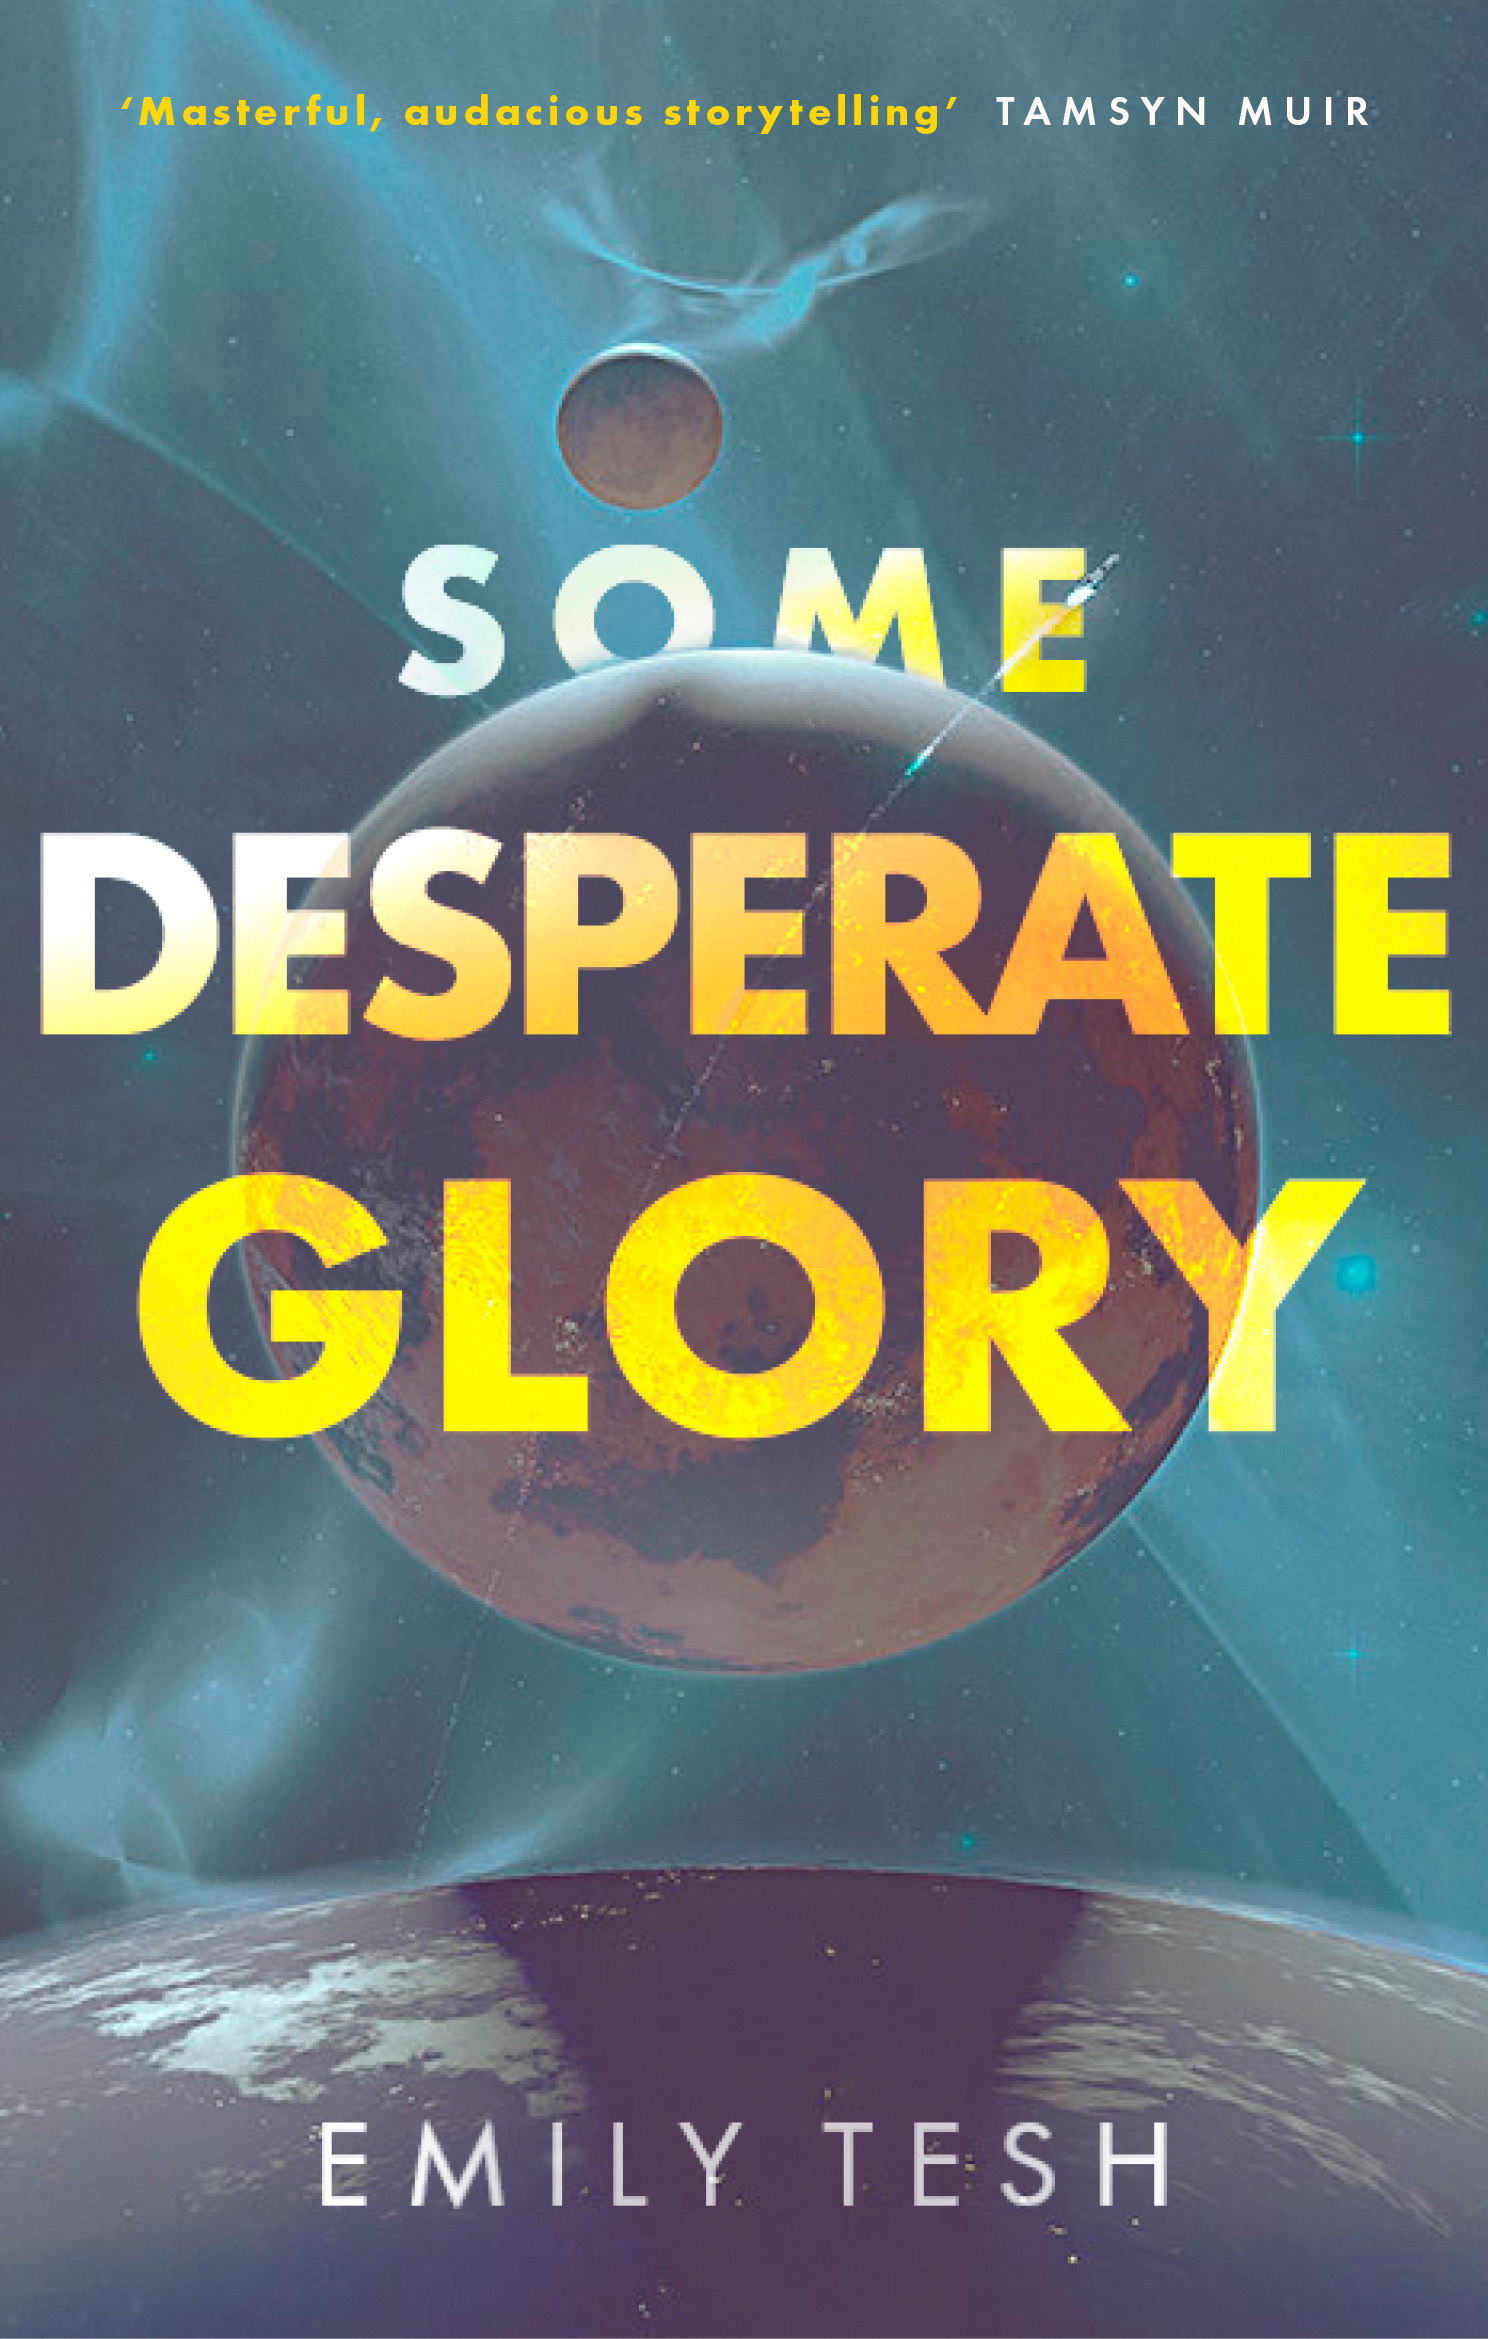 The book cover for Some Desperate Glory by Emily Tesh, showing a pastel scene of a planet, a moon and a spaceship in orbit